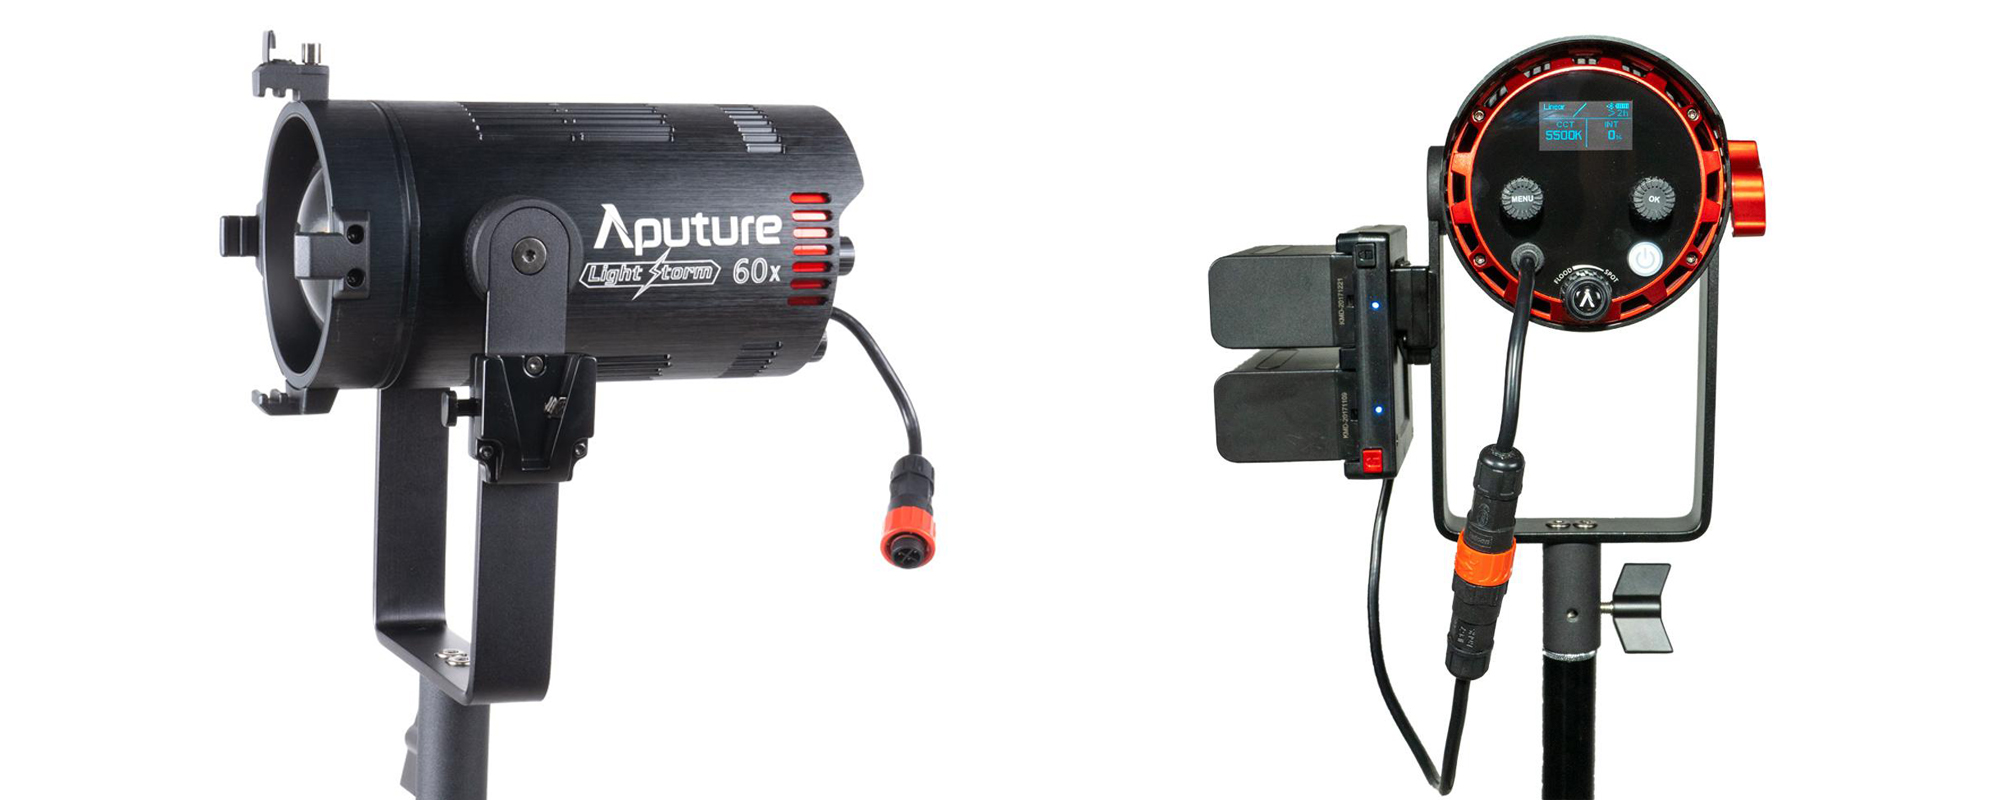 Aputure Light Storm LS 60x front and rear LED lamp